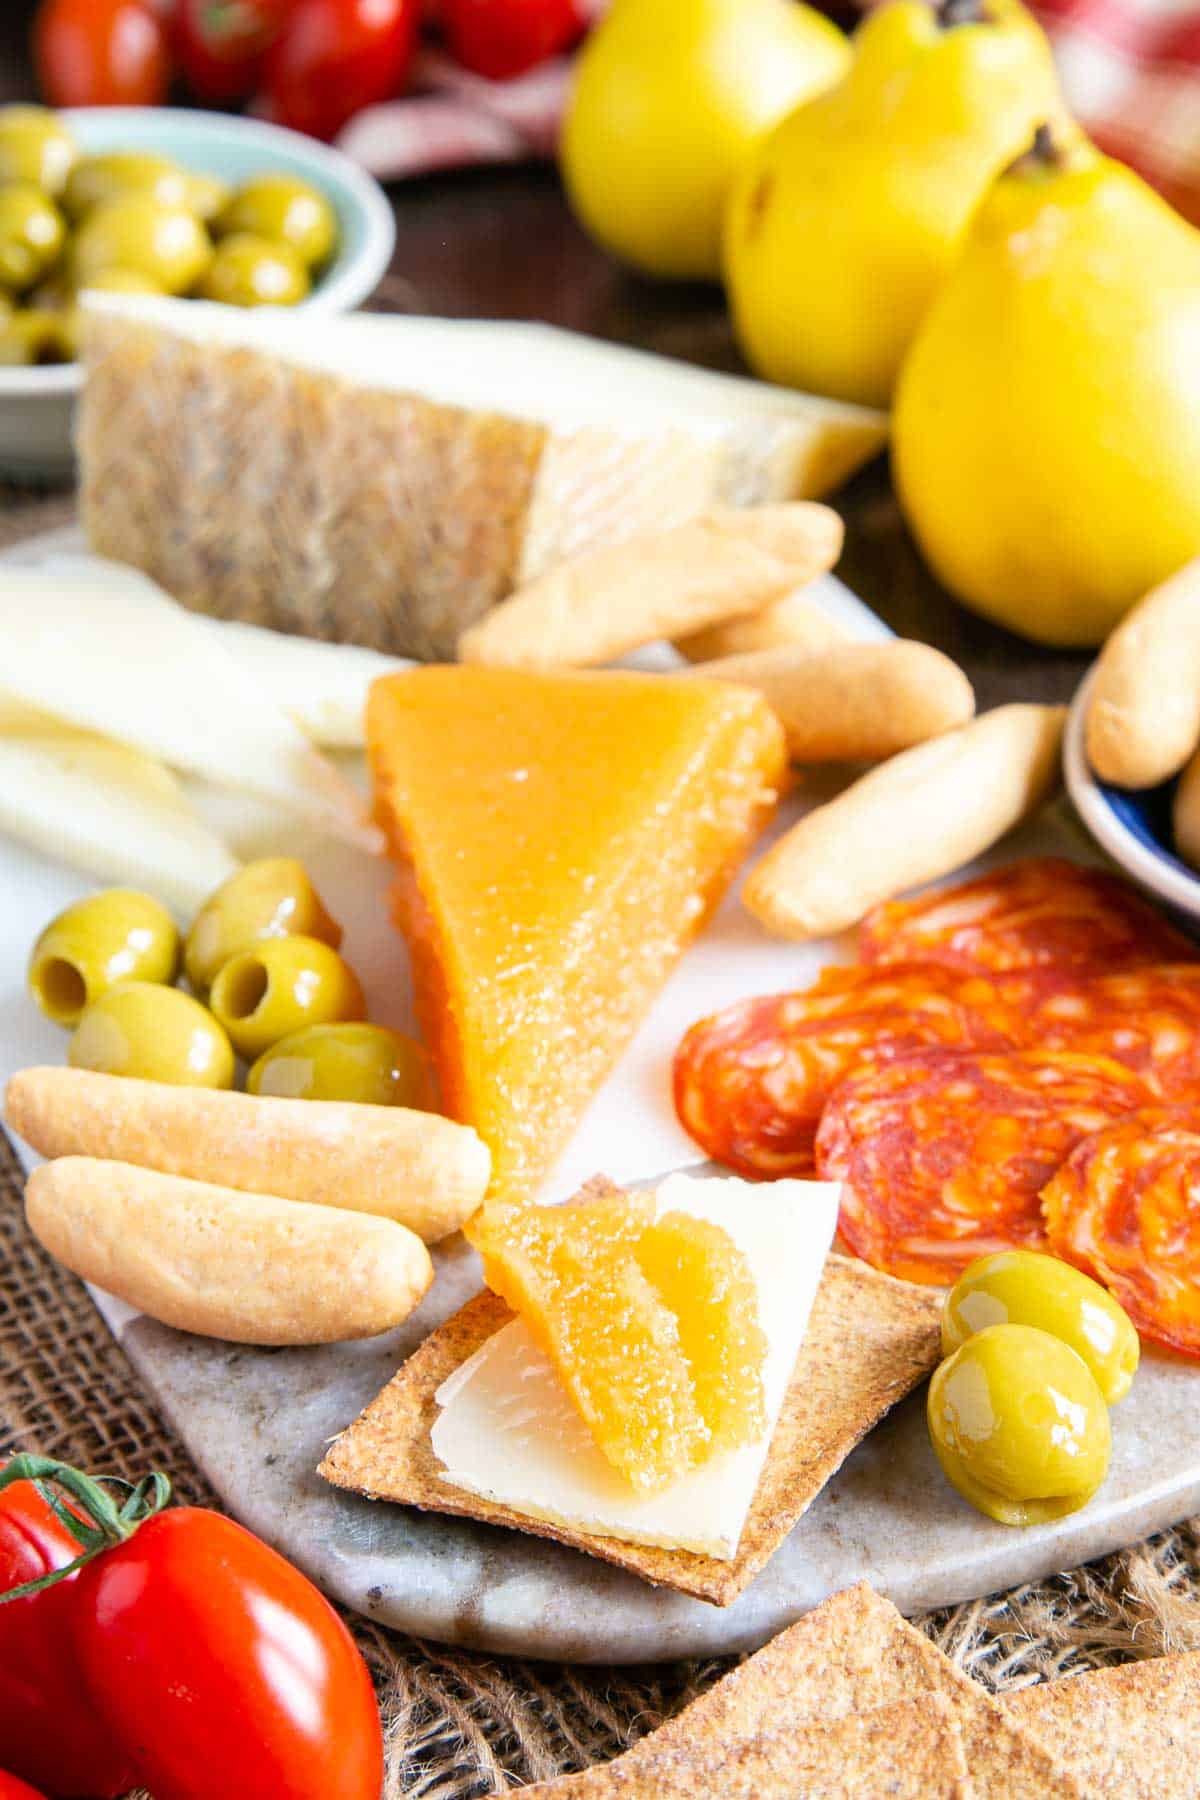 A golden wedge of membrillo or quince cheese served on a platter with cheese, olives and charcuterie.